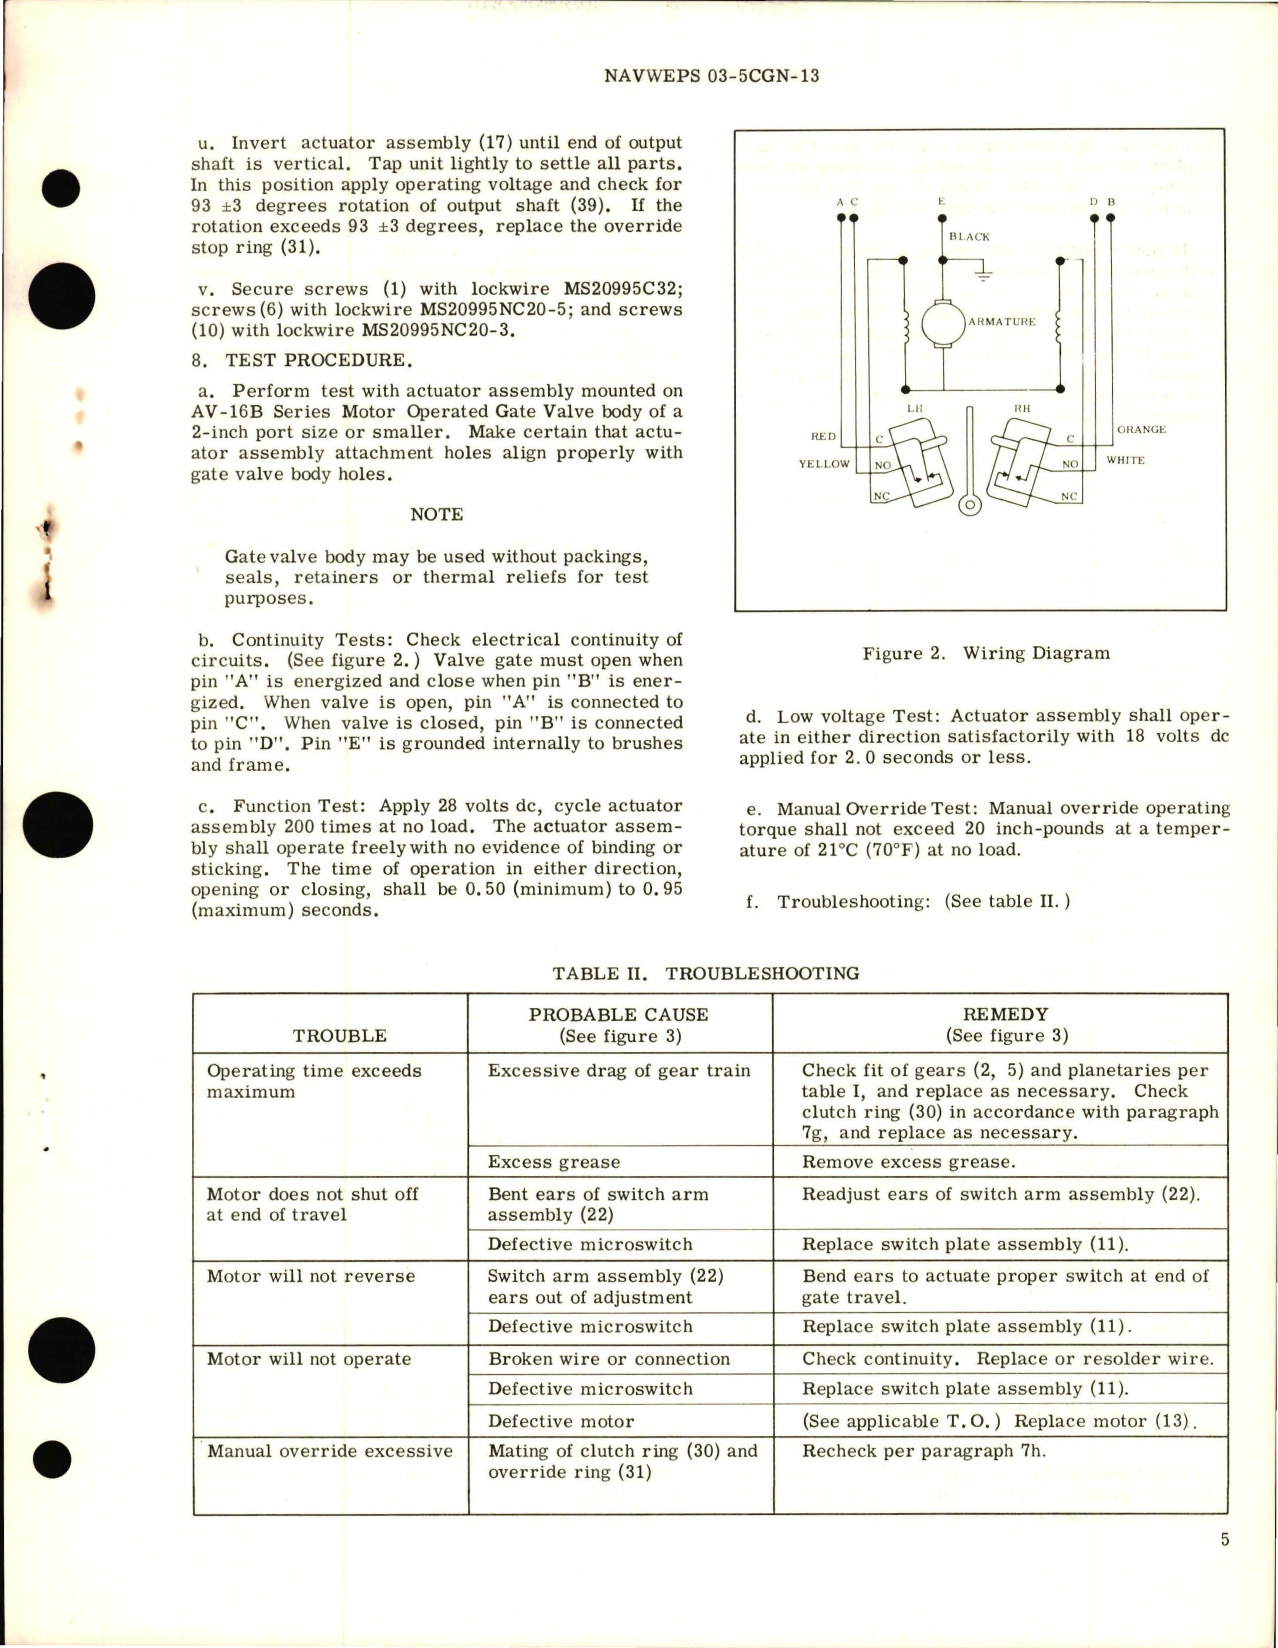 Sample page 5 from AirCorps Library document: Overhaul Instructions with Parts Breakdown for Actuator Assembly - Part 102842BV 